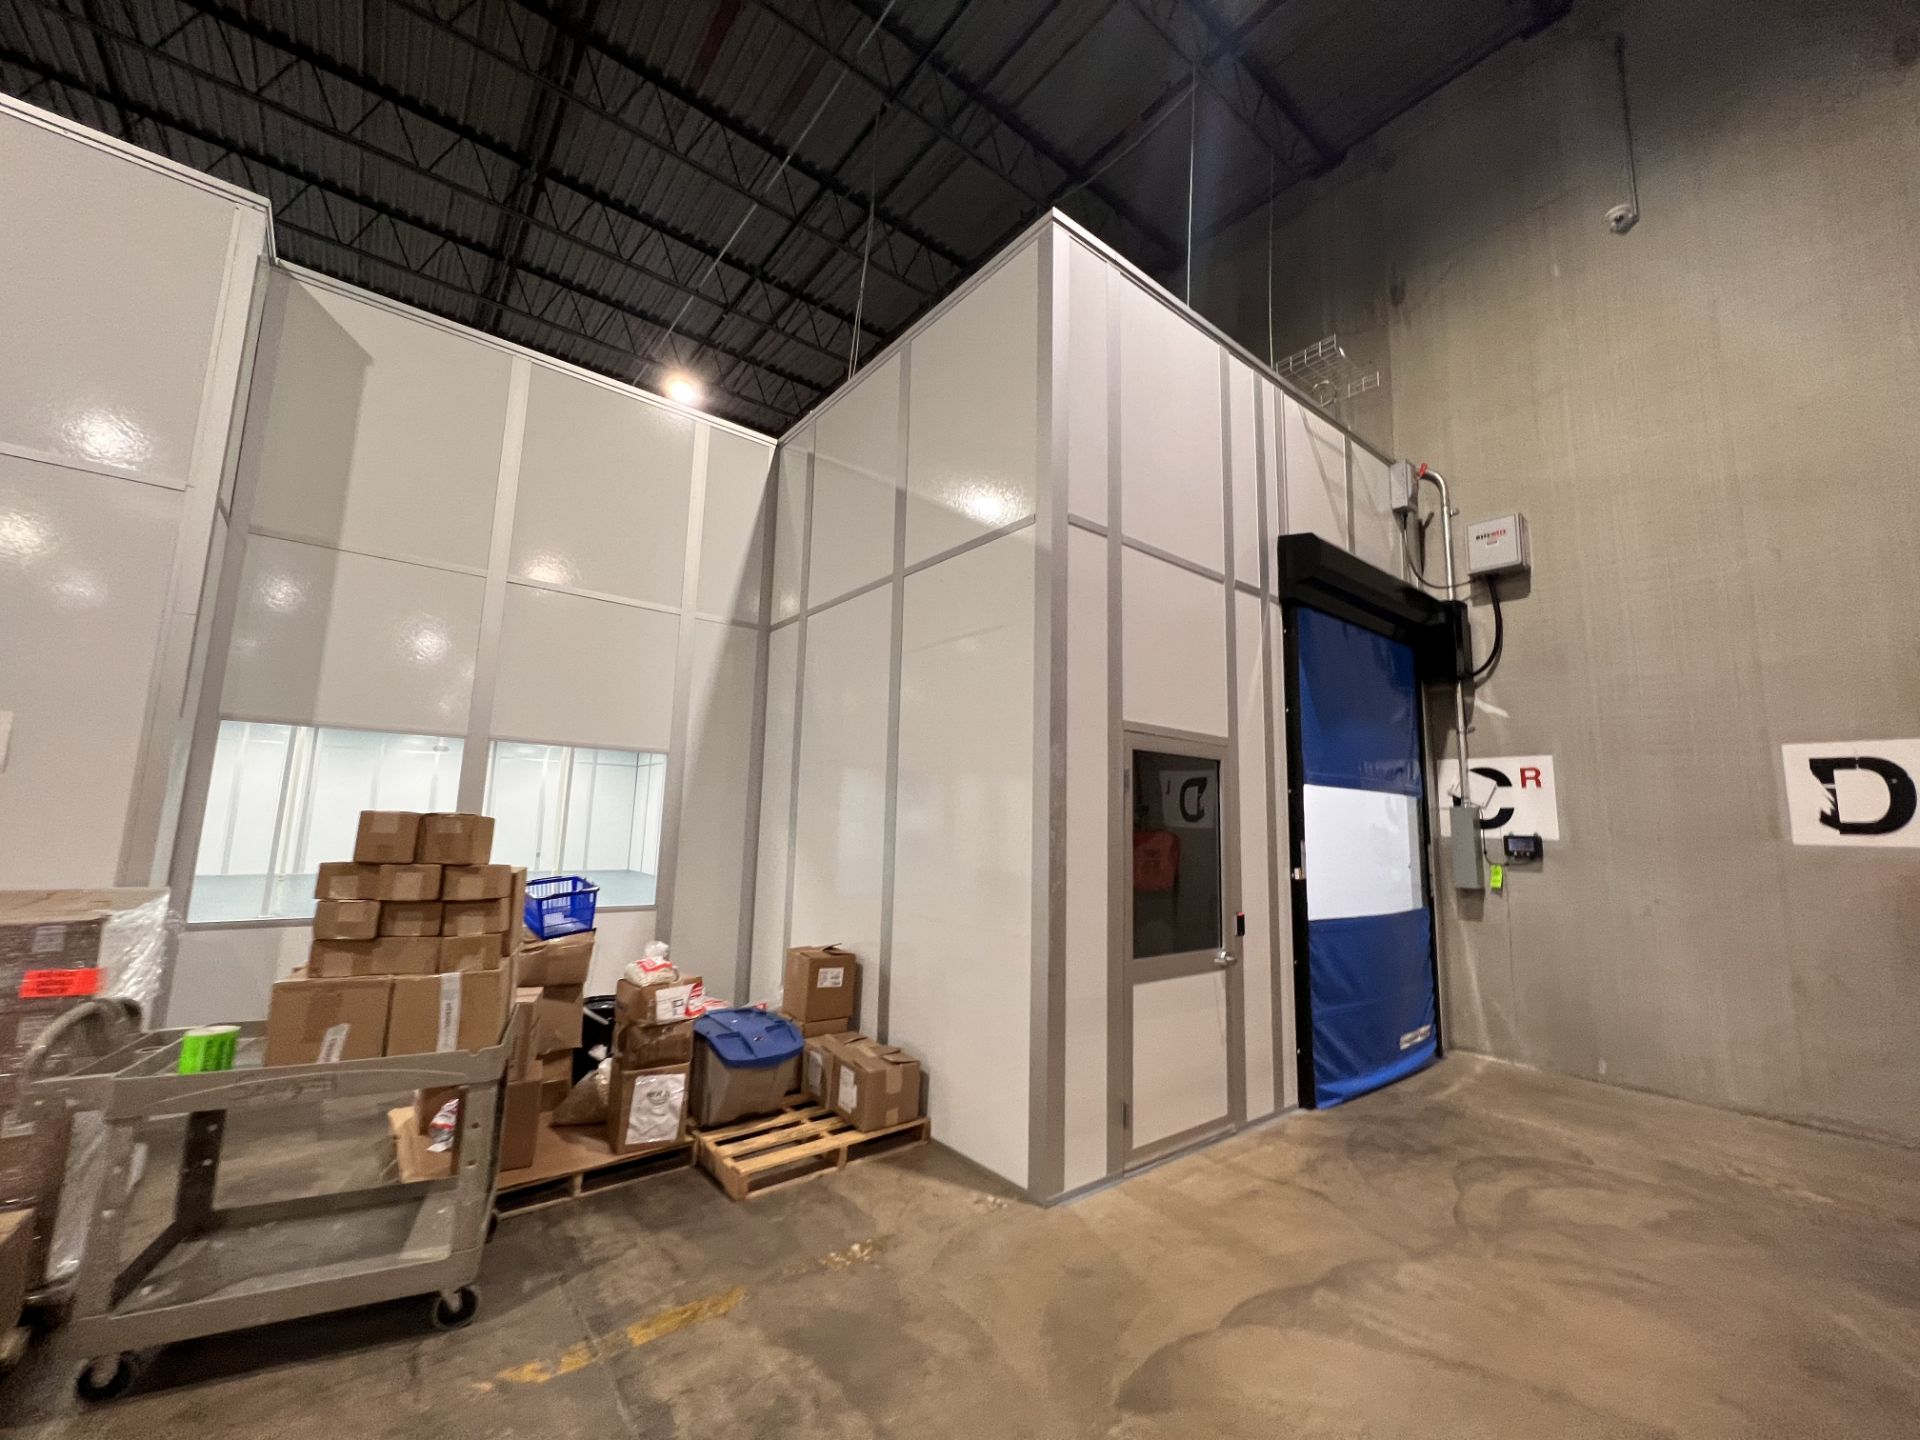 MODULAR CLEAN ROOM, APPROX. 60 FT X 60 FT X 11 FT 10 IN, INCLUDES HEPA FILTRATION UNITS - Image 9 of 34